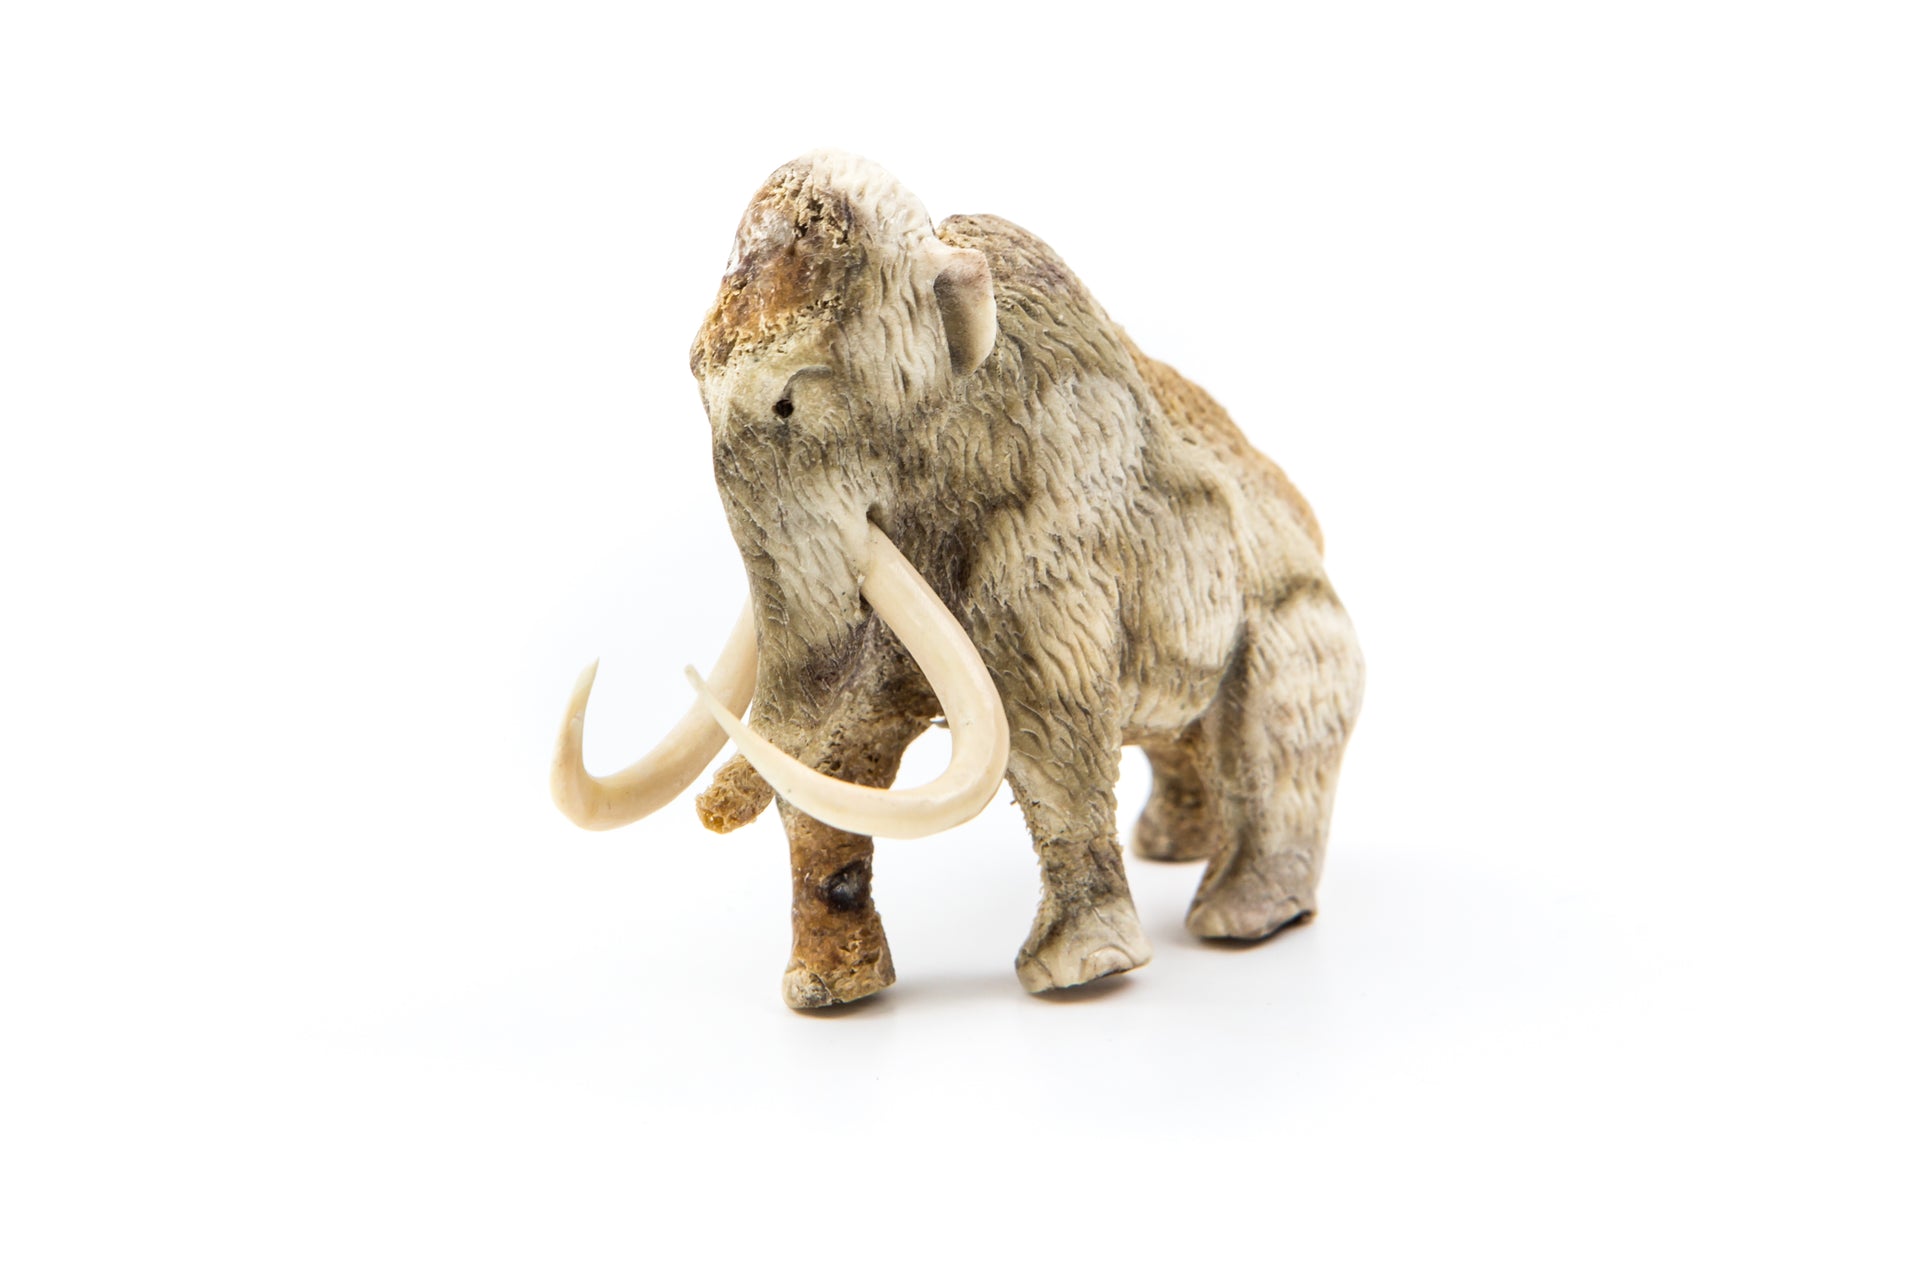 Carved mammoth